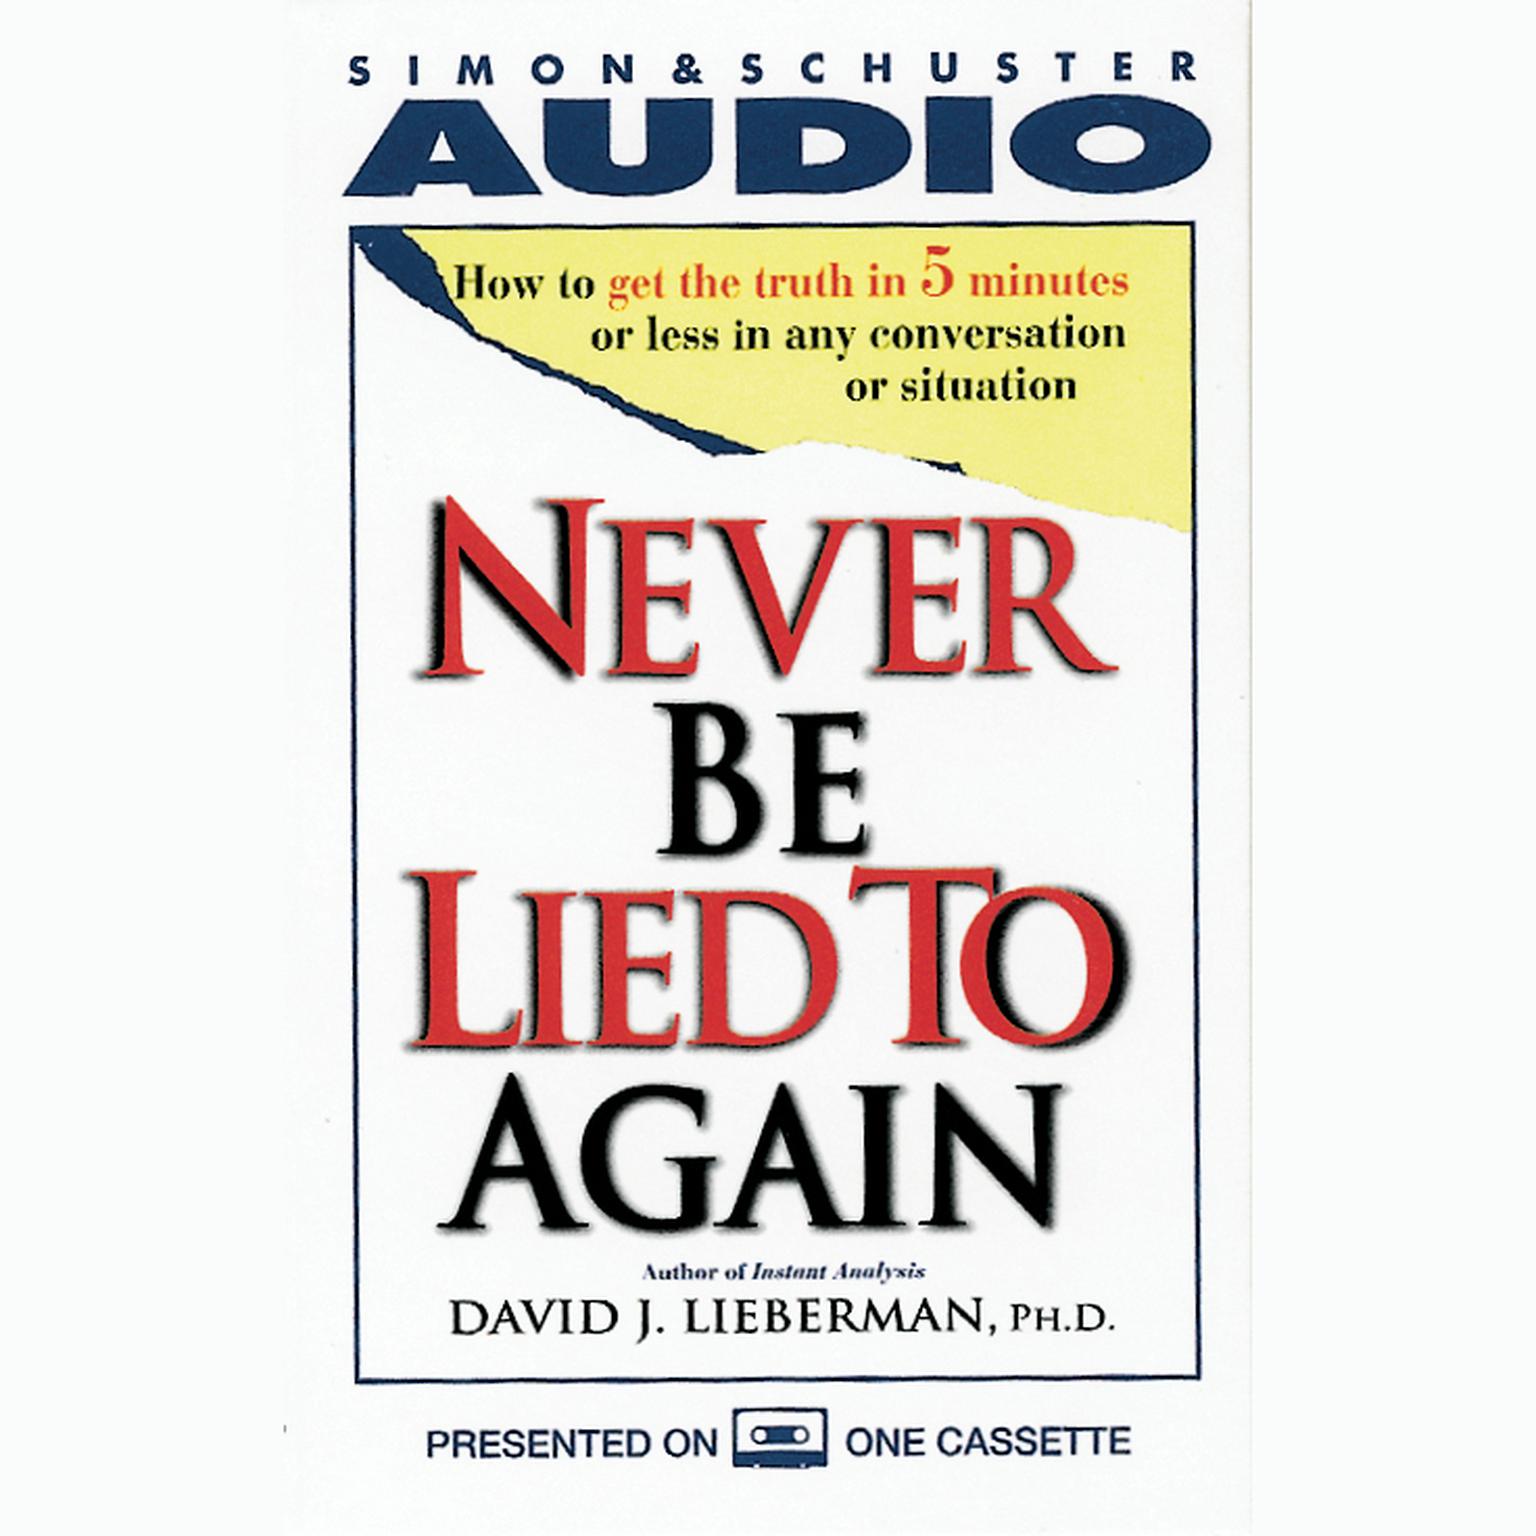 Never Be Lied To Again (Abridged): How to Get the Truth in Five Minutes or Less in Any Conversation or Situation Audiobook, by David J. Lieberman